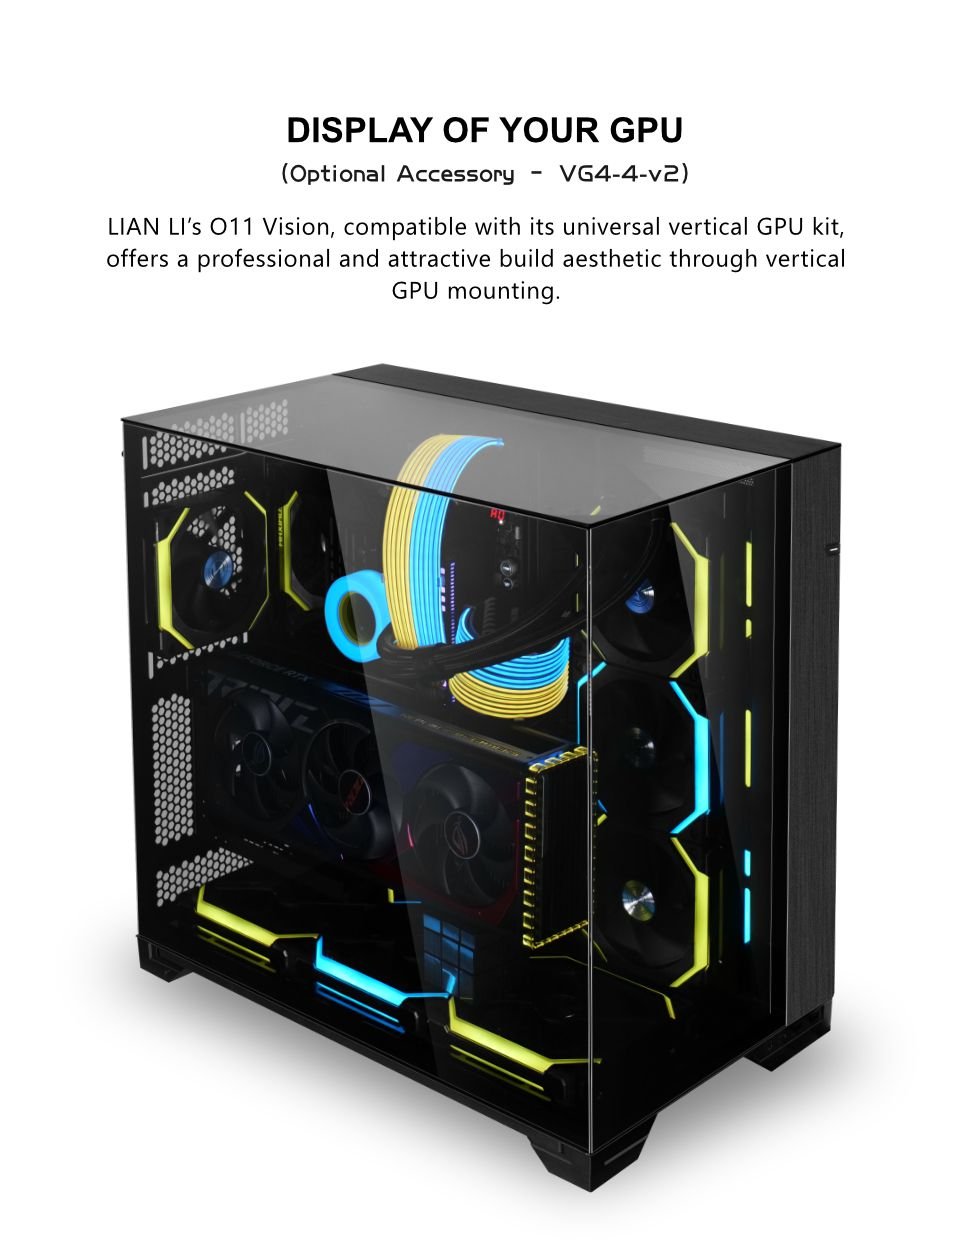 O11 VISION – LIAN LI is a Leading Provider of PC Cases